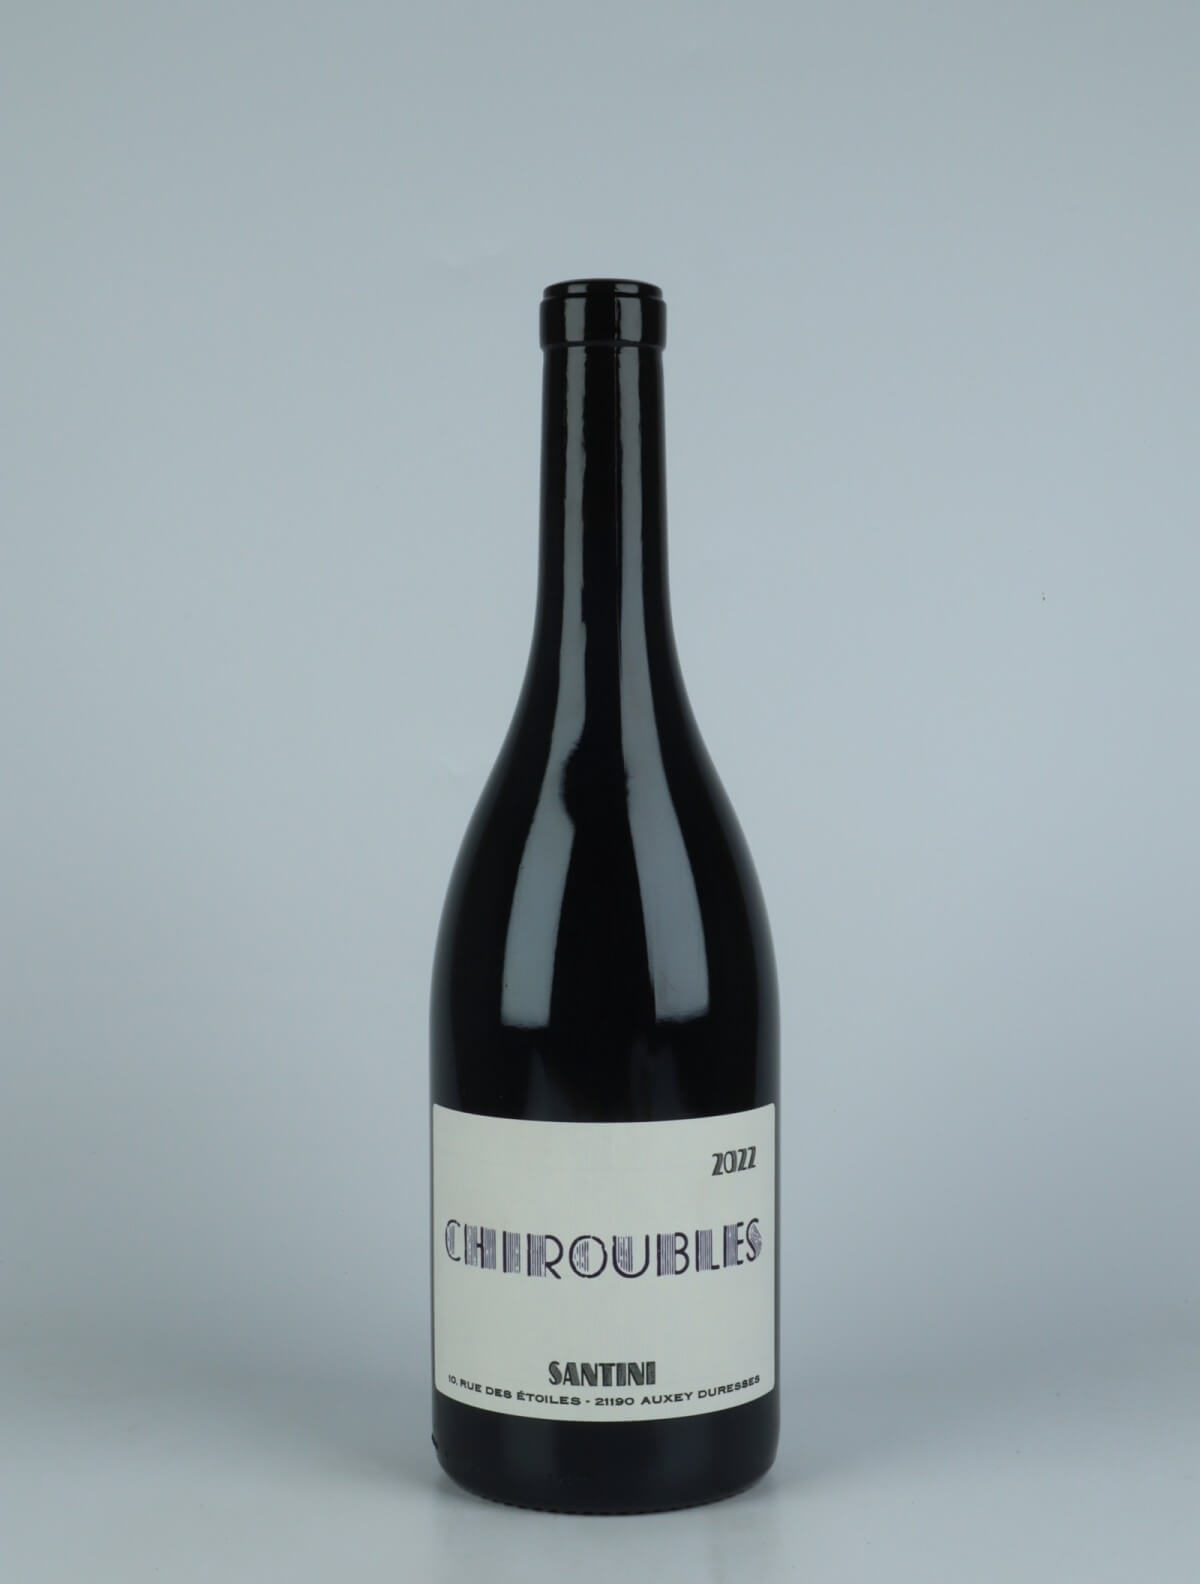 A bottle 2022 Chiroubles Red wine from Santini, Burgundy in France